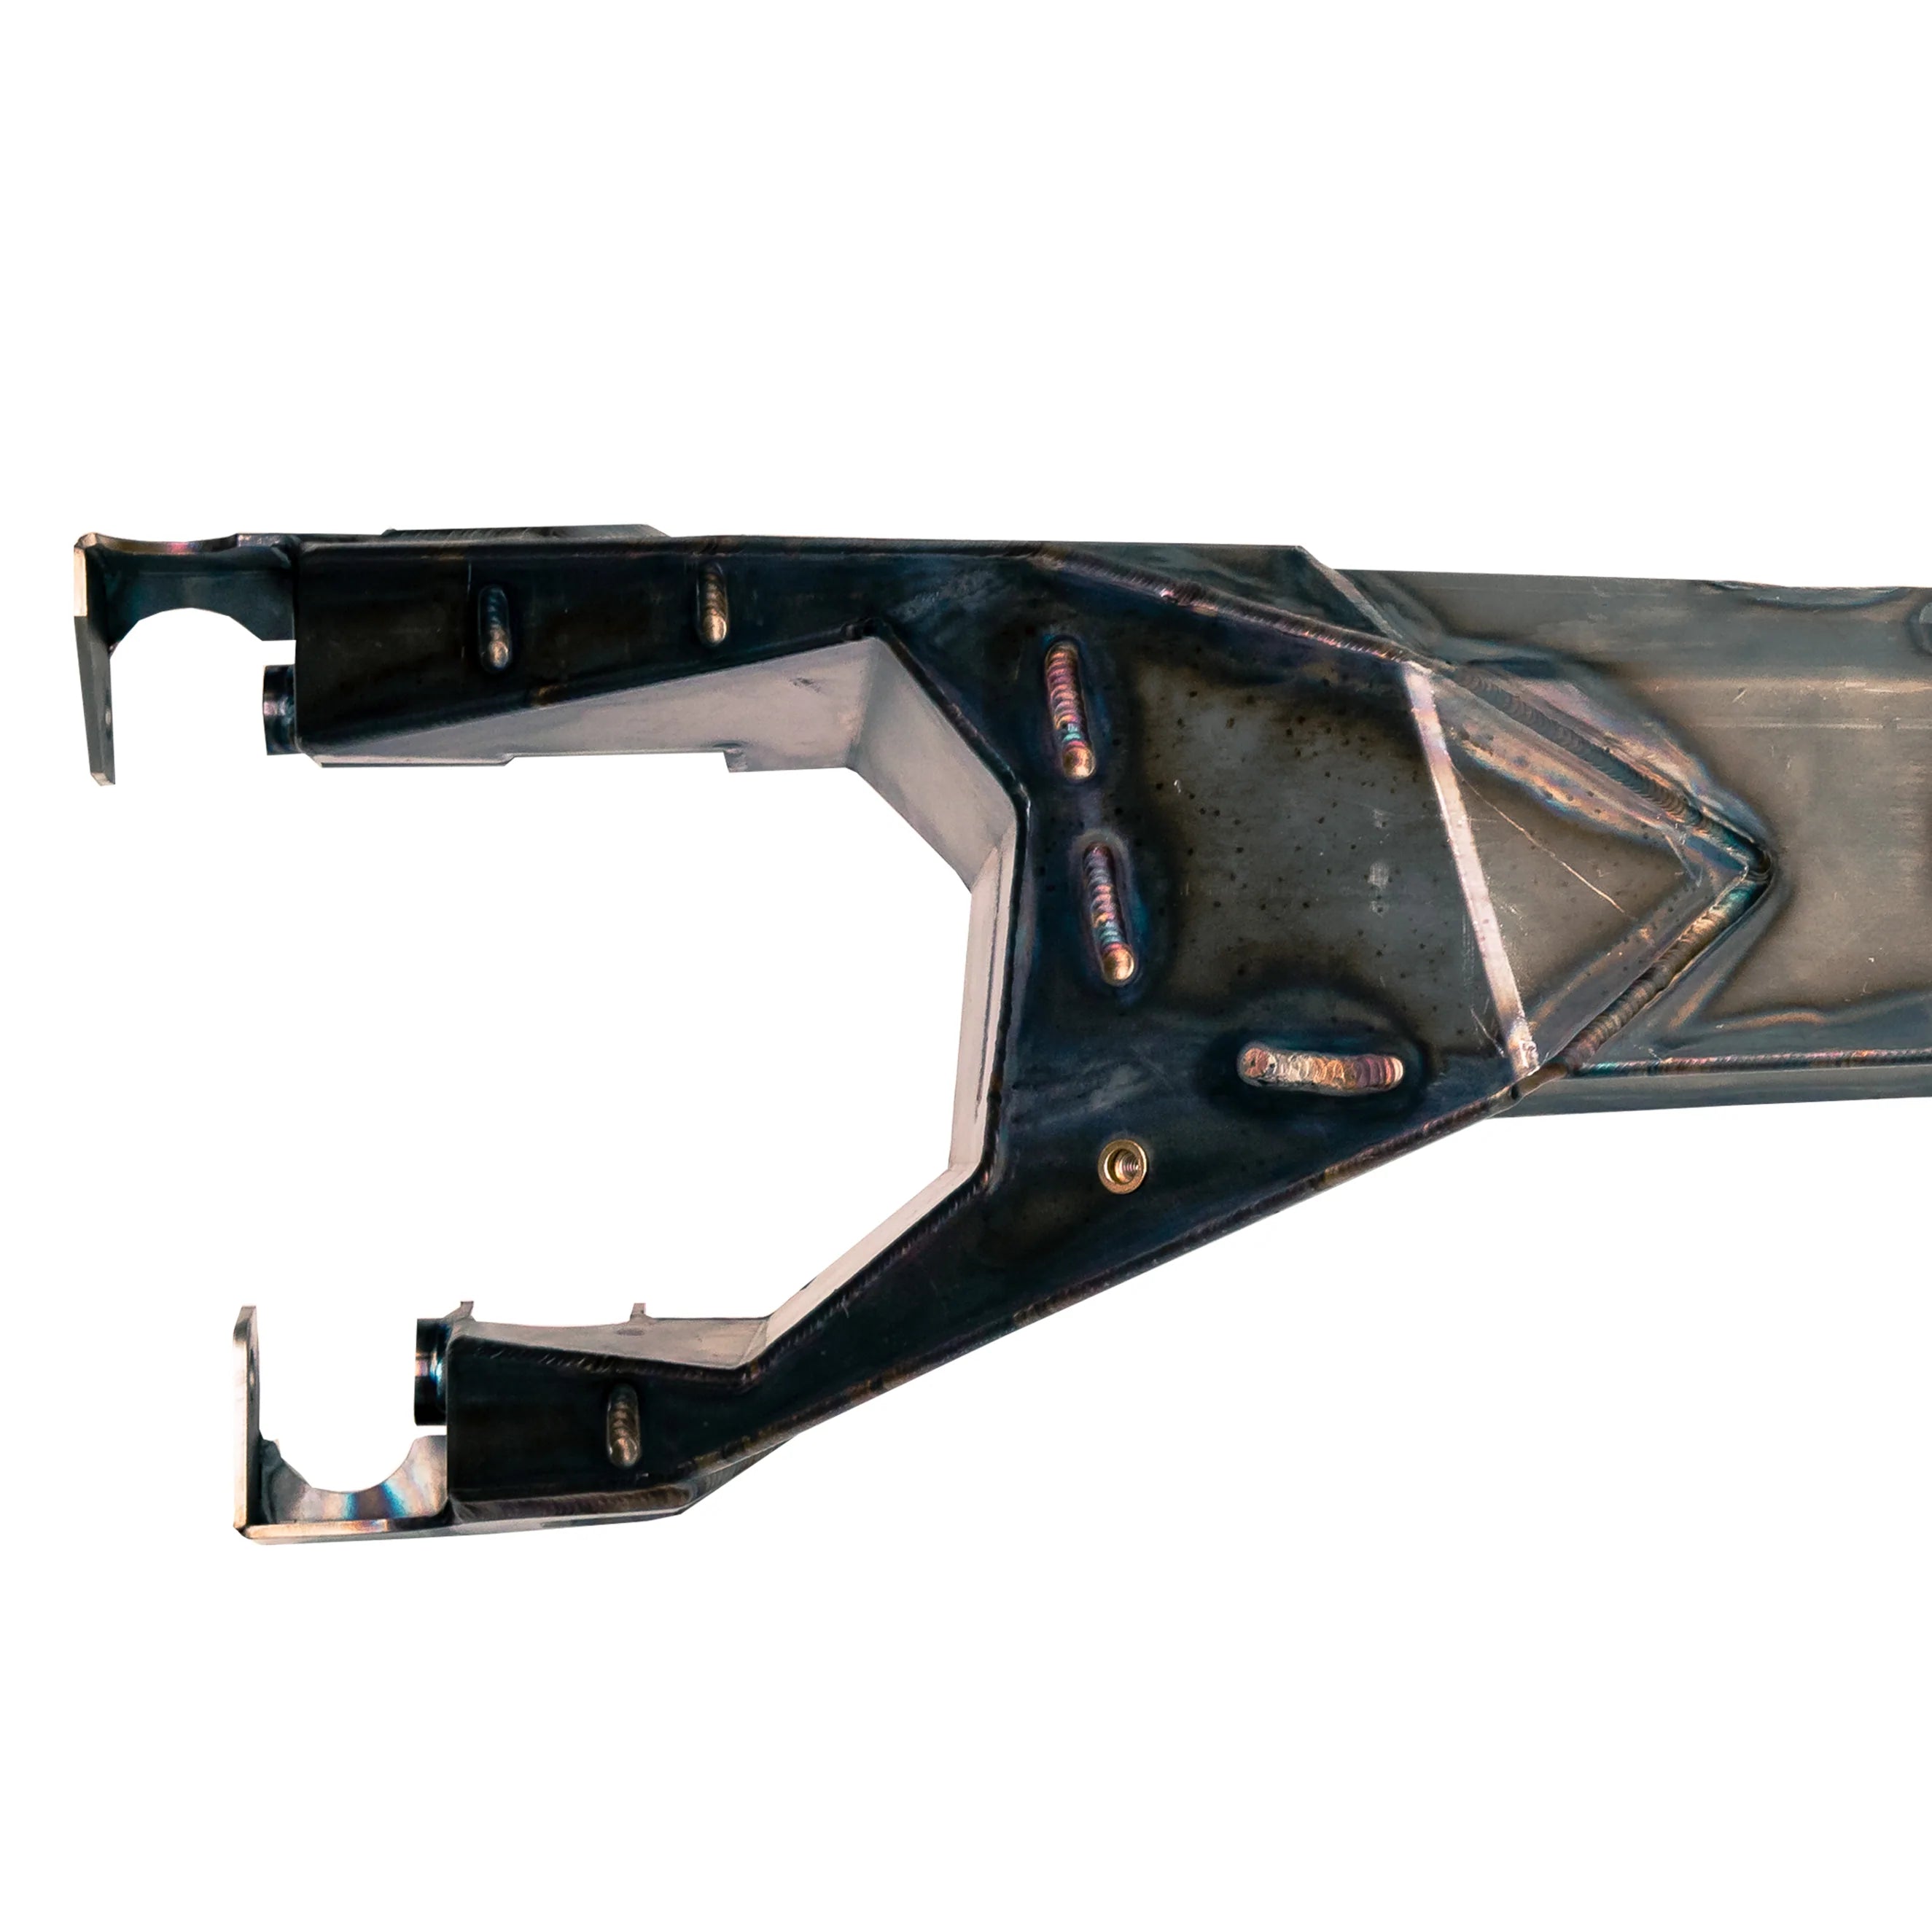 CAN AM X3 72" TRAILING ARMS